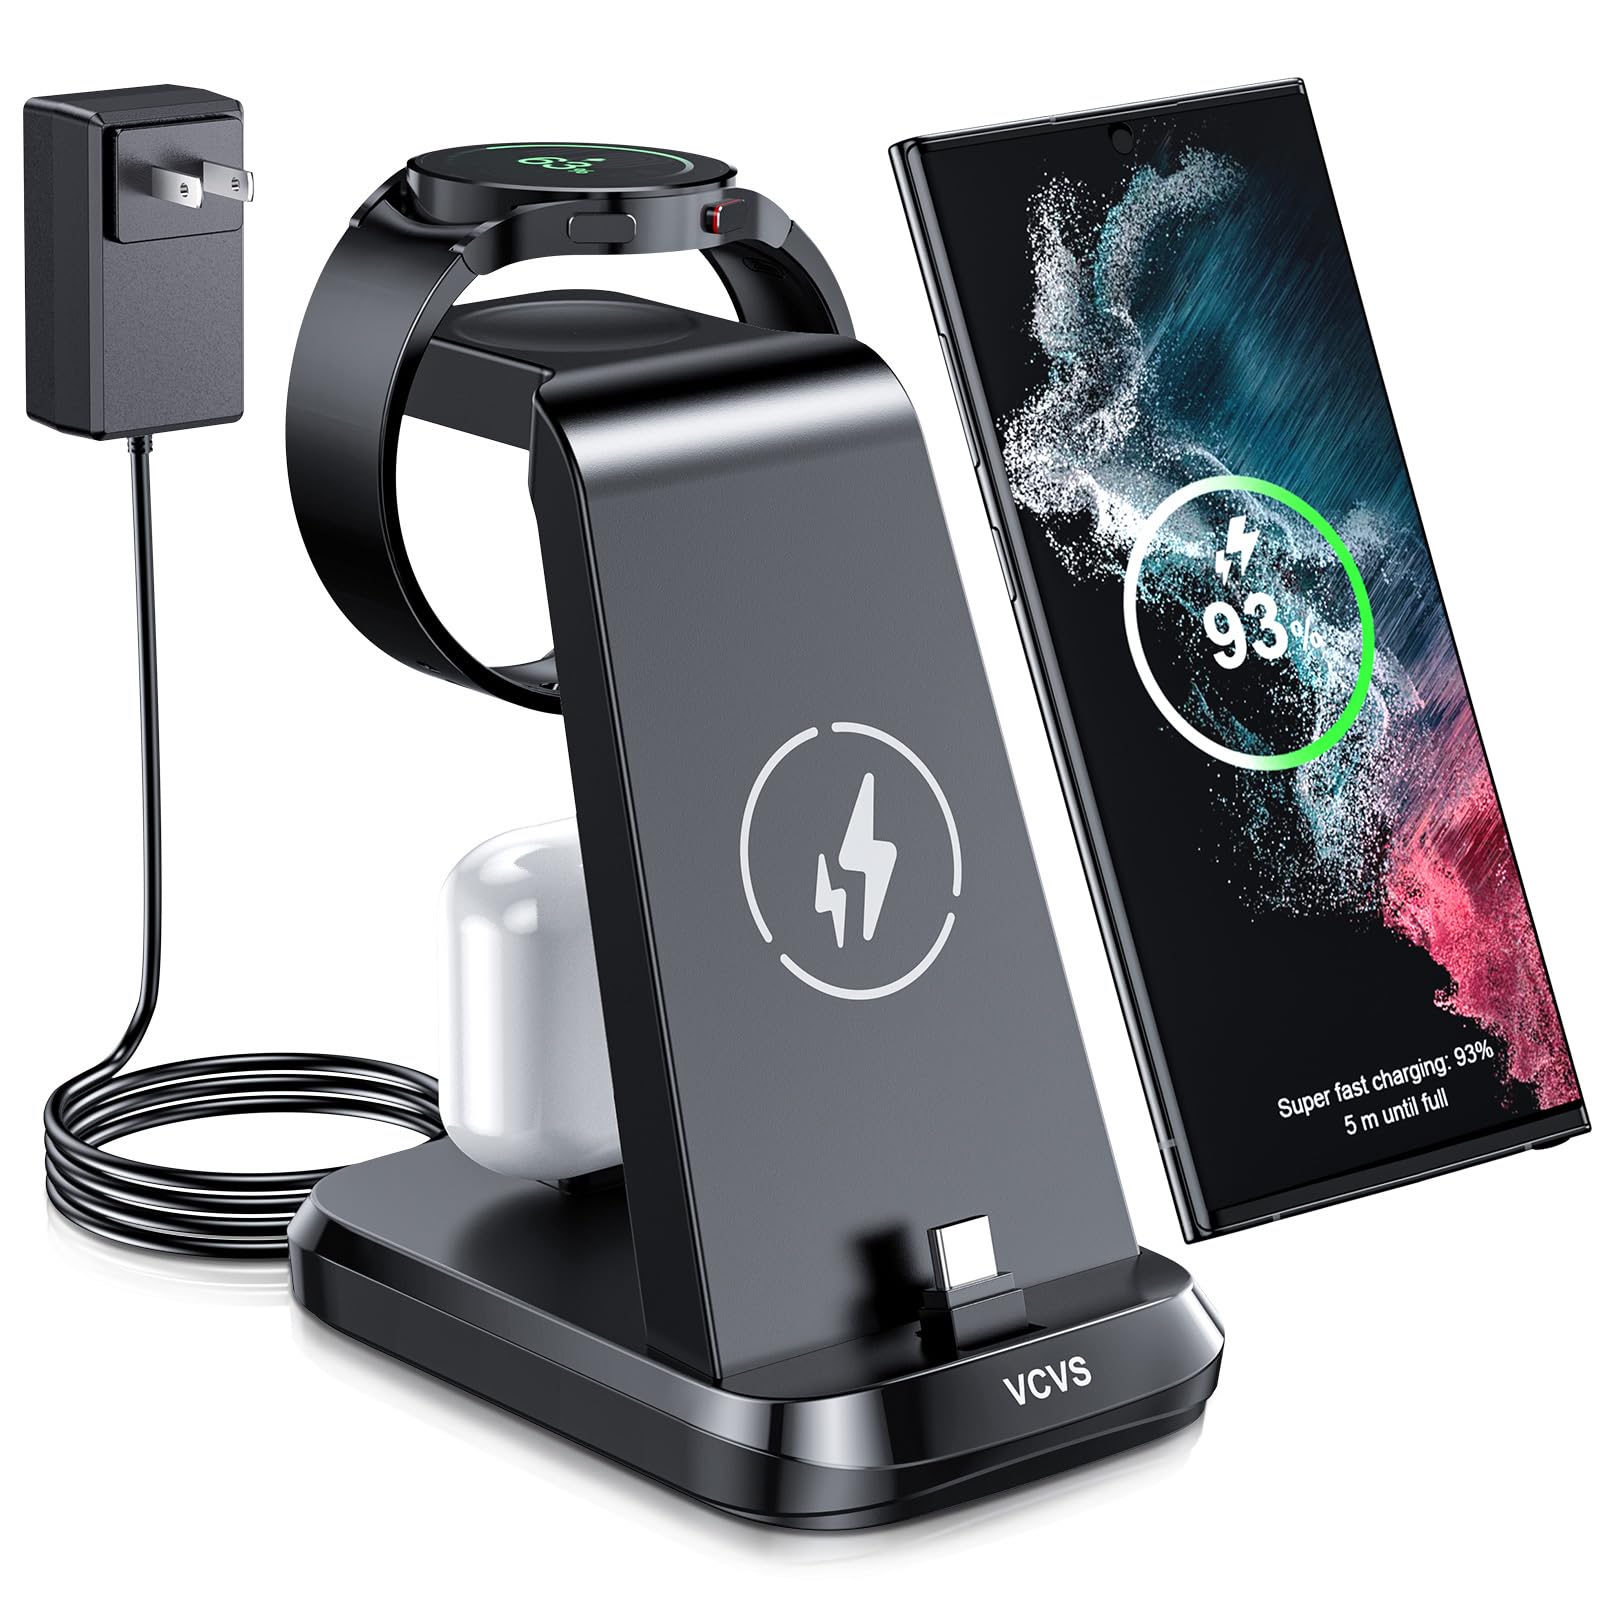 36W USB C Super Fast Charging Station for Samsung Phones, iPhone 15/Pro/Max, Android Phones, VCVS 3 in 1 Wireless Charger for Samsung Galaxy Watch 6/5/4/3, USB-C Earbuds